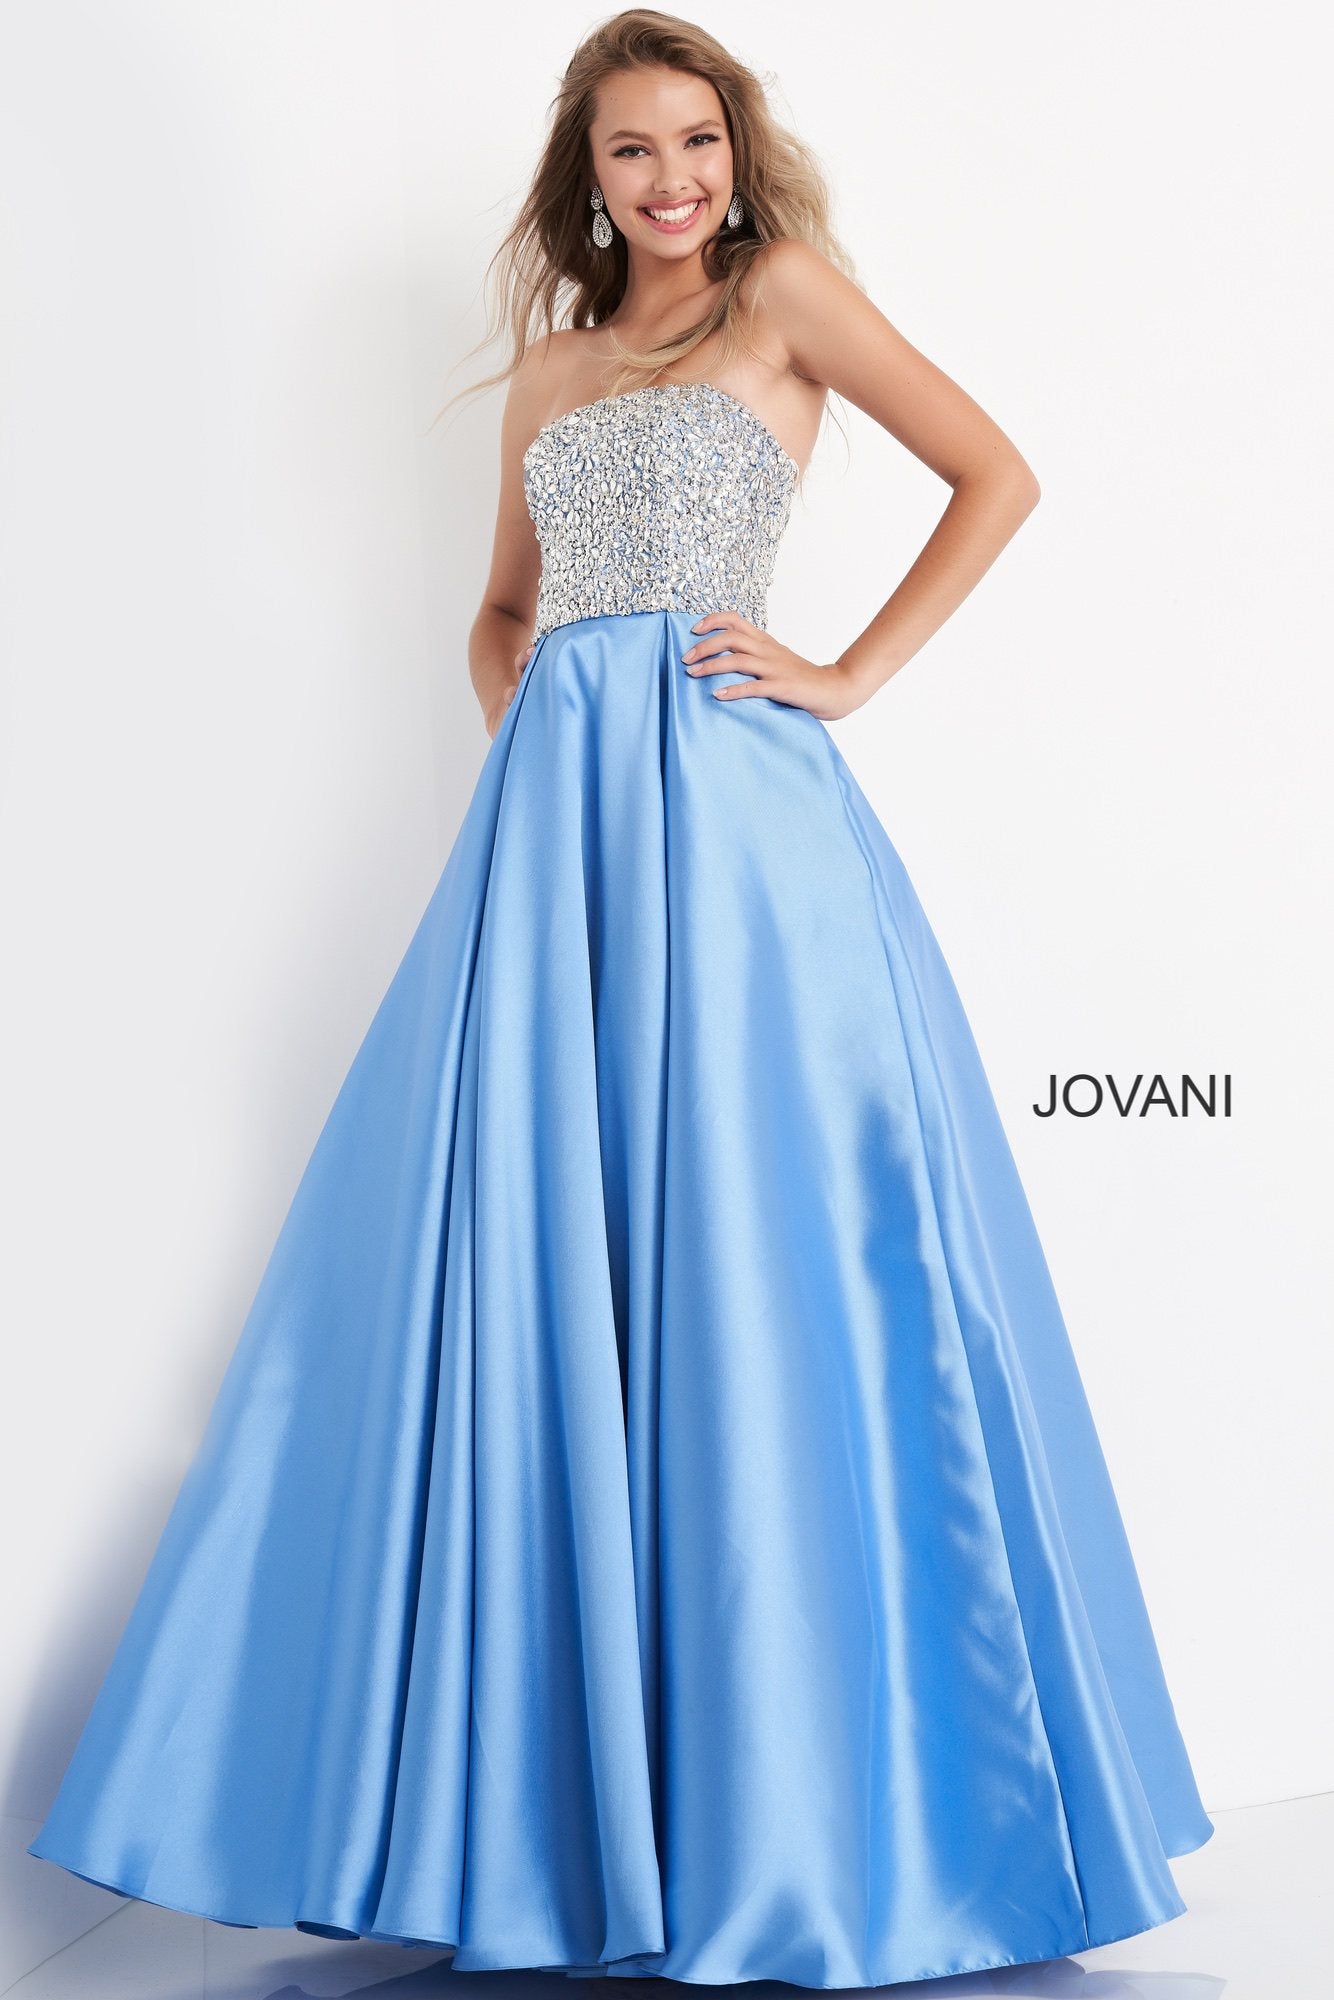 Jovani Kids k66689 is a Long Girls Party Dress, Kids Pageant Gown & Pre Teen Formal Evening Wear gown. This Girls Ballgown Features a Strapless straight neckline with a fitted bodice Embellished with Crystals & Rhinestones. A Line Pleated Ballgown Skirt - Floor Length. Great Girls Pageant Dress!  Available Girls Sizes: 8, 10, 12, 14  Available Colors: lilac, pink, silver, sky-blue, white